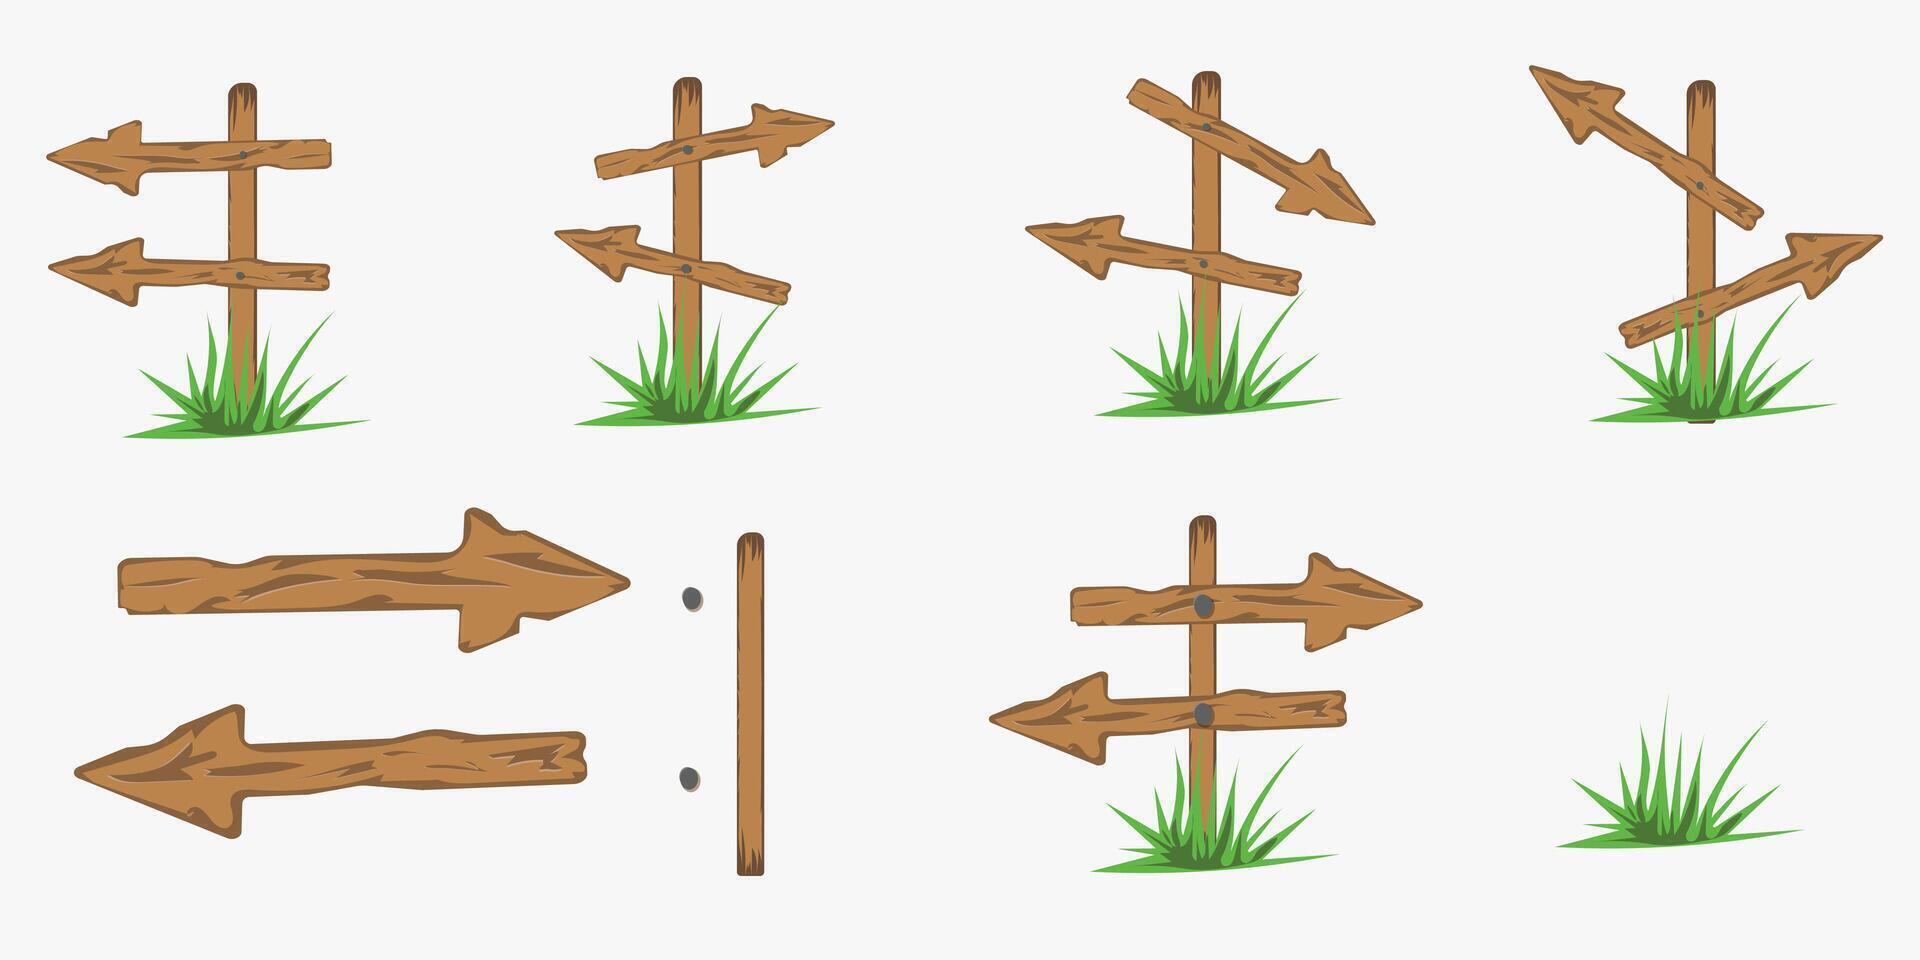 wooden signs with green grass. scenographer of arrows for any purpose. Abstract template with wooden signs. vector